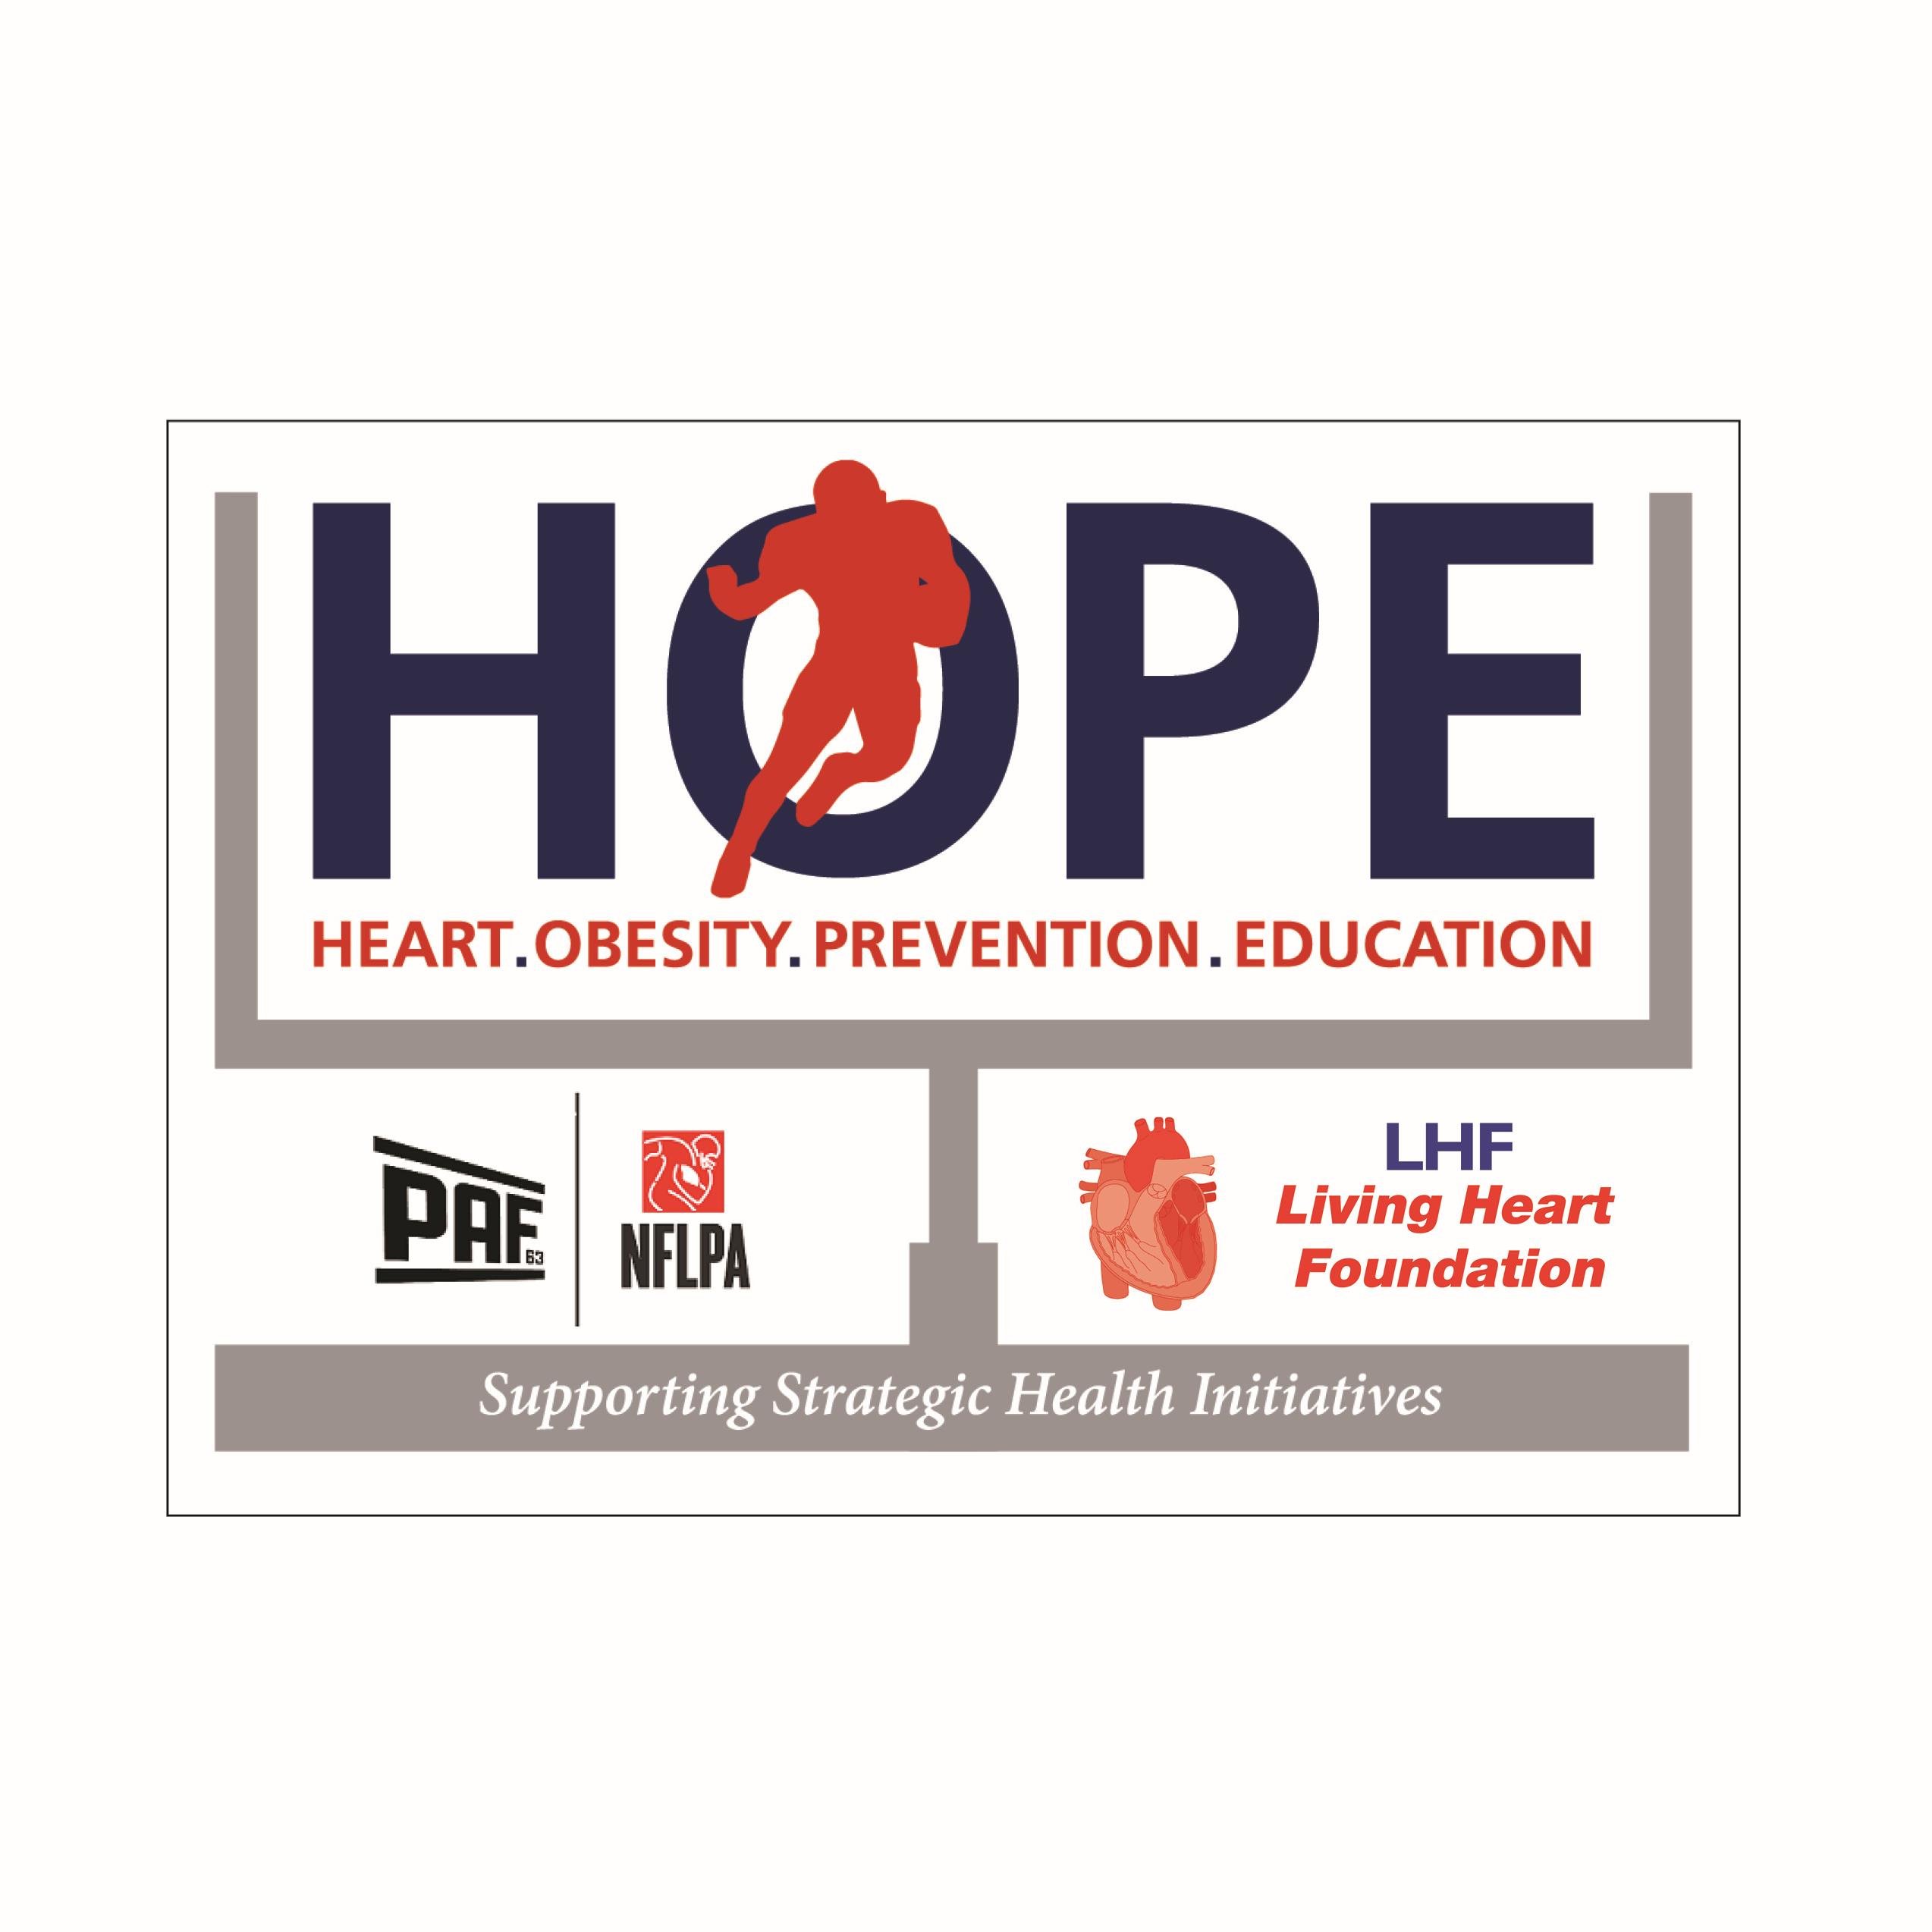 Living Heart Foundation - Heart Obesity Prevention Education Programs for Former NFL Players' Cardiac Health Screenings, Intervention, Research